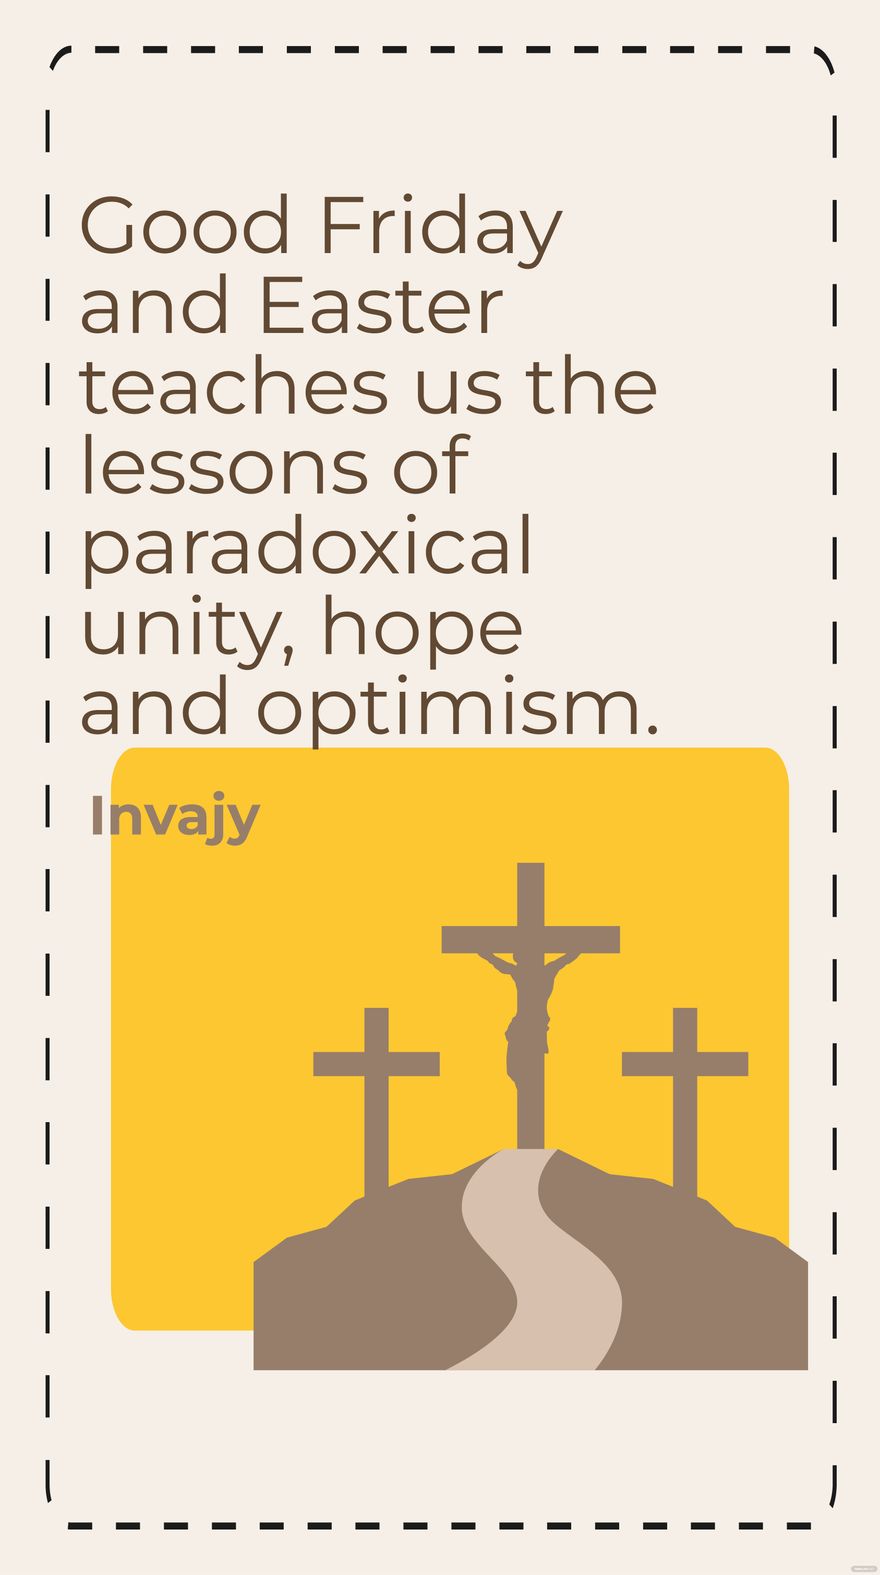 Invajy - Good Friday and Easter teaches us the lessons of paradoxical unity, hope and optimism. in JPG